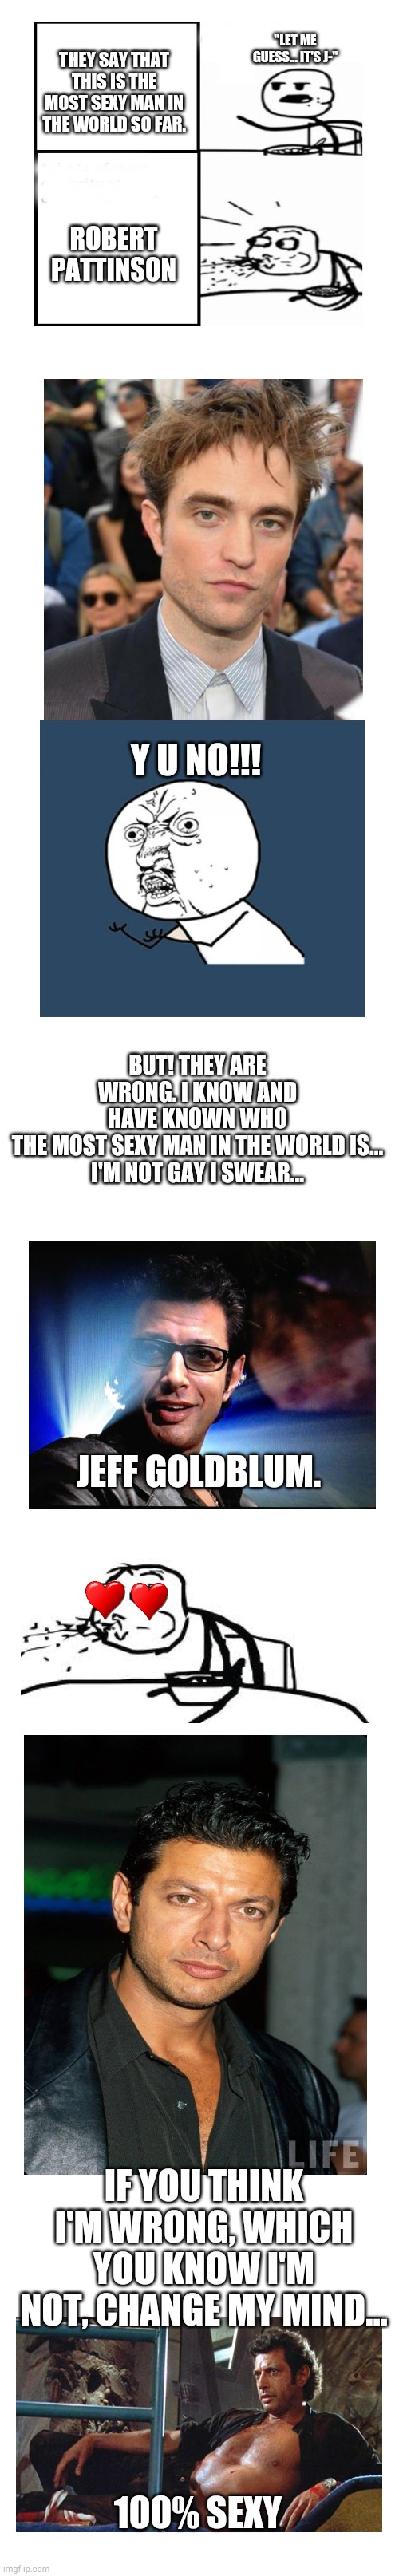 I really do think Jeff Goldblum is sexier... | "LET ME GUESS... IT'S J-"; THEY SAY THAT THIS IS THE MOST SEXY MAN IN THE WORLD SO FAR. ROBERT PATTINSON; Y U NO!!! BUT! THEY ARE WRONG. I KNOW AND HAVE KNOWN WHO THE MOST SEXY MAN IN THE WORLD IS...

I'M NOT GAY I SWEAR... JEFF GOLDBLUM. IF YOU THINK I'M WRONG, WHICH YOU KNOW I'M NOT, CHANGE MY MIND... 100% SEXY | image tagged in blank white template,jeff goldblum,robert pattinson,funny,meme,memes | made w/ Imgflip meme maker